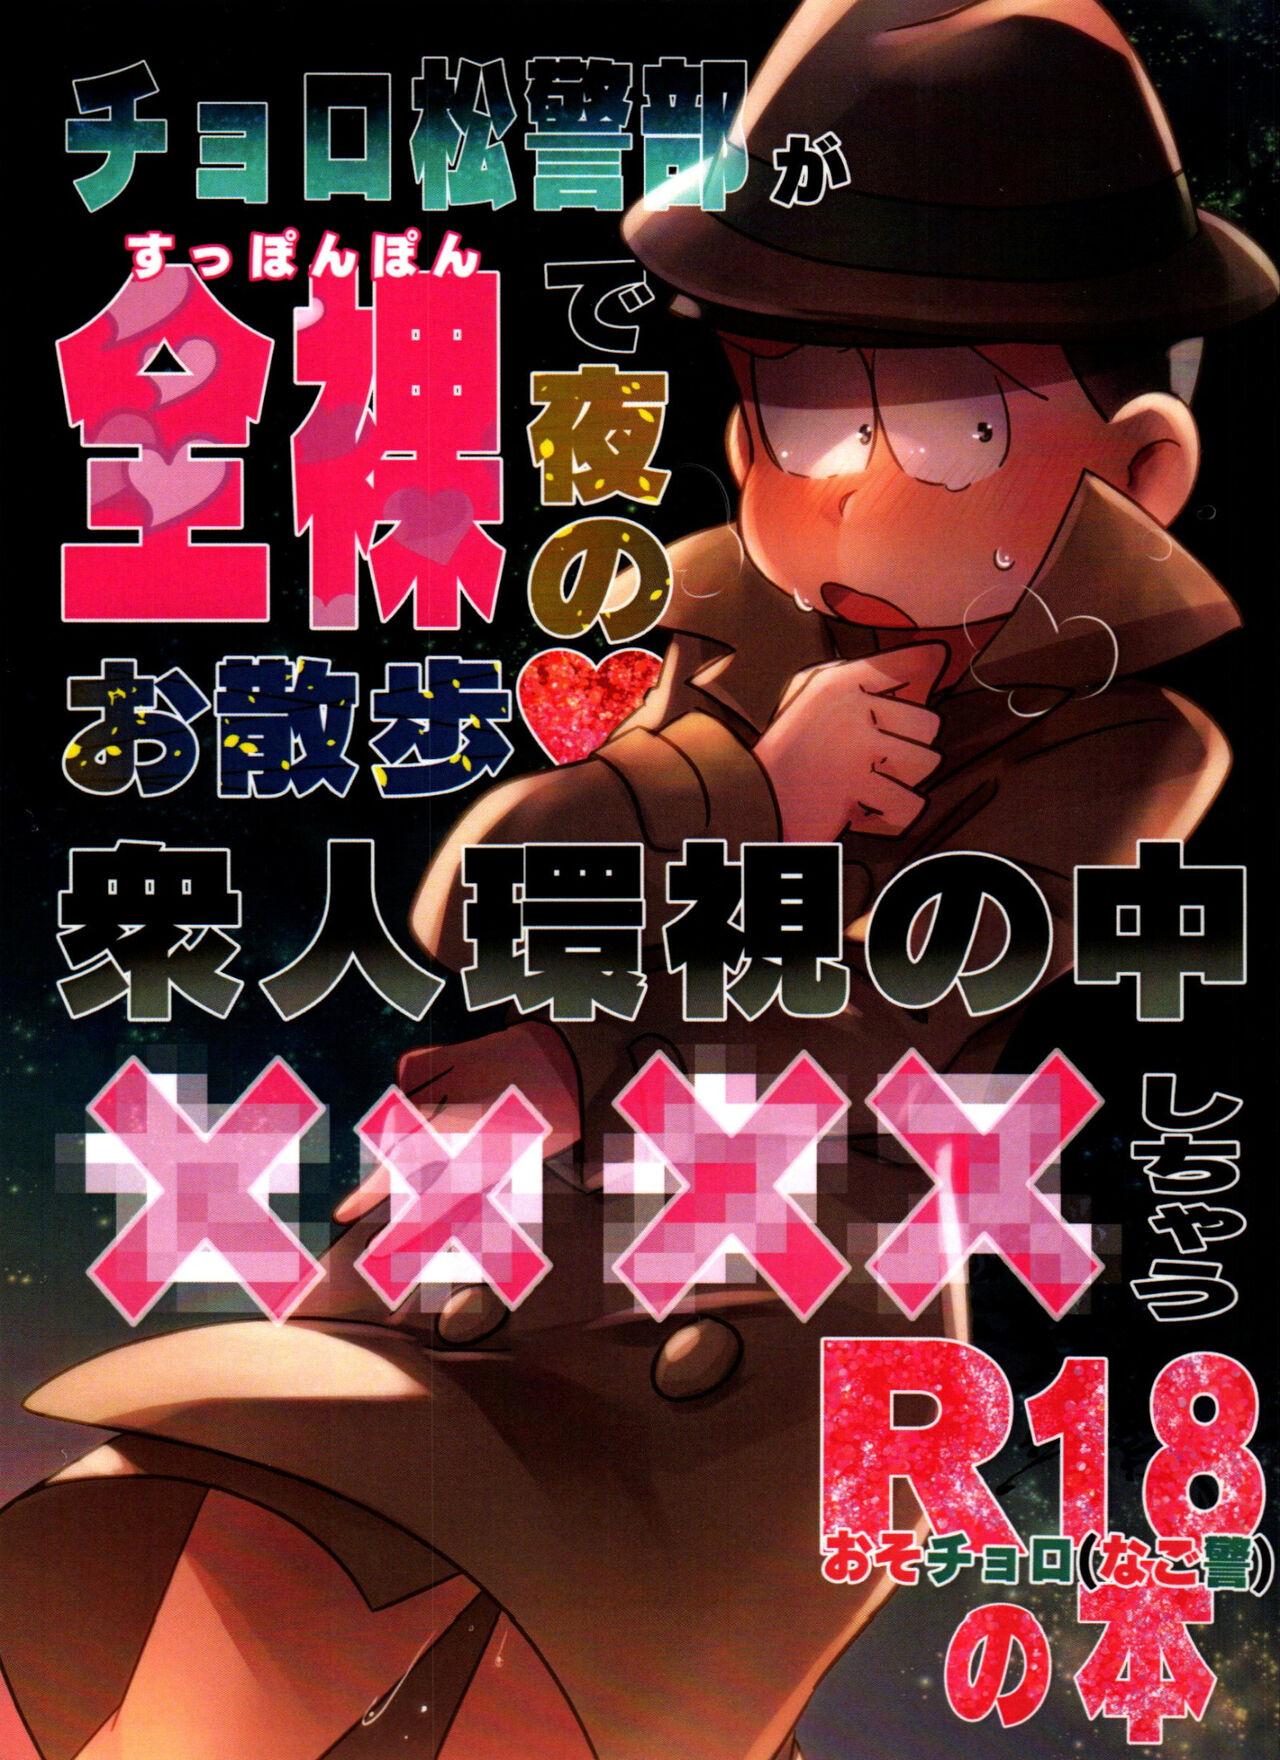 Officesex Inspector Choromatsu walks naked at night and does XXX in the public eye R18 book - Osomatsu san Dick - Page 1